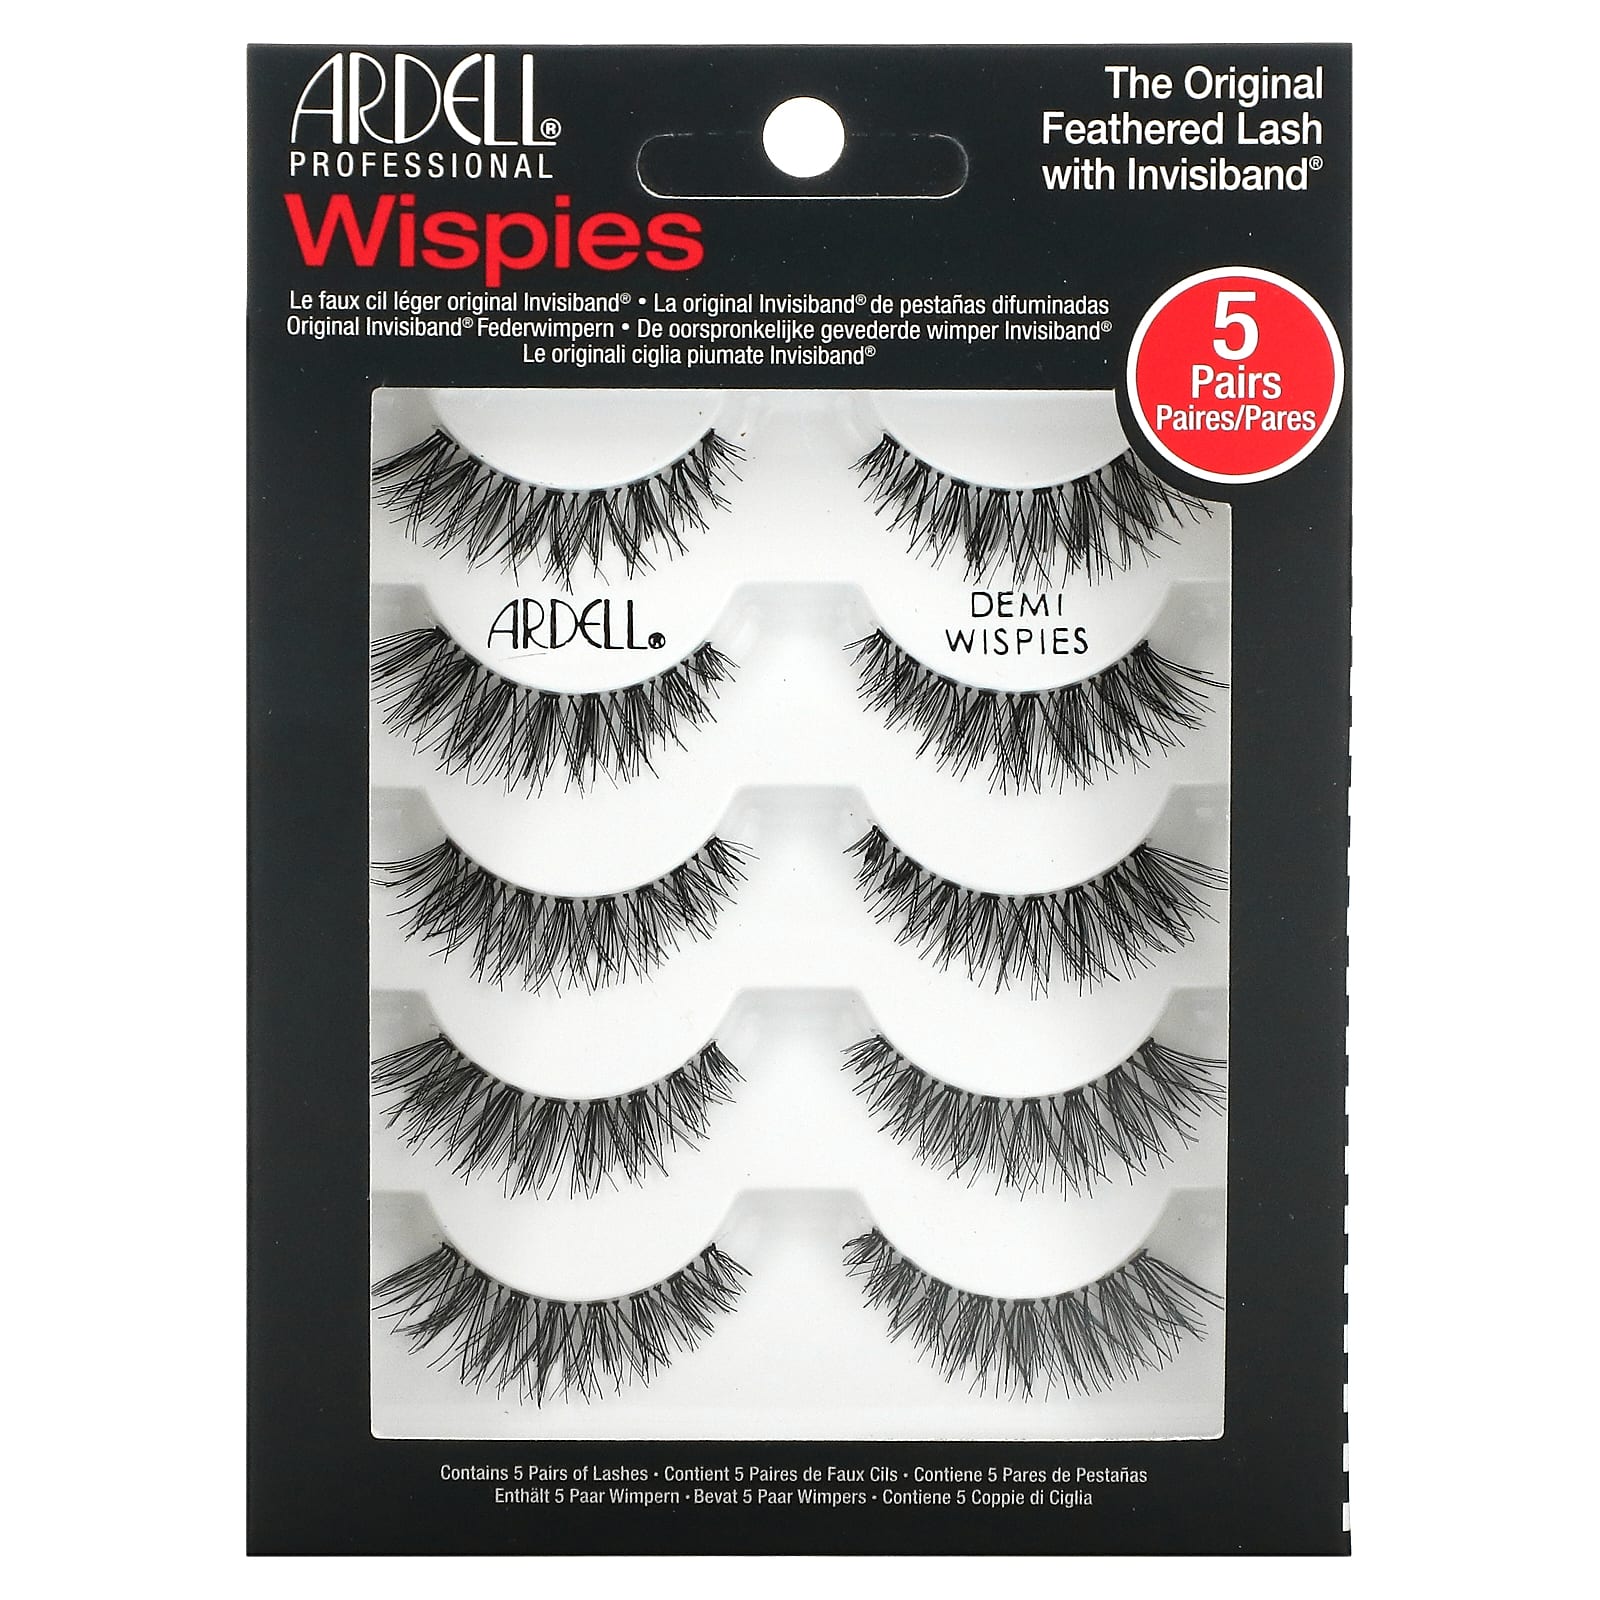 Ardell, Wispies, Original Feathered Lash with Invisiband, 5 Pairs